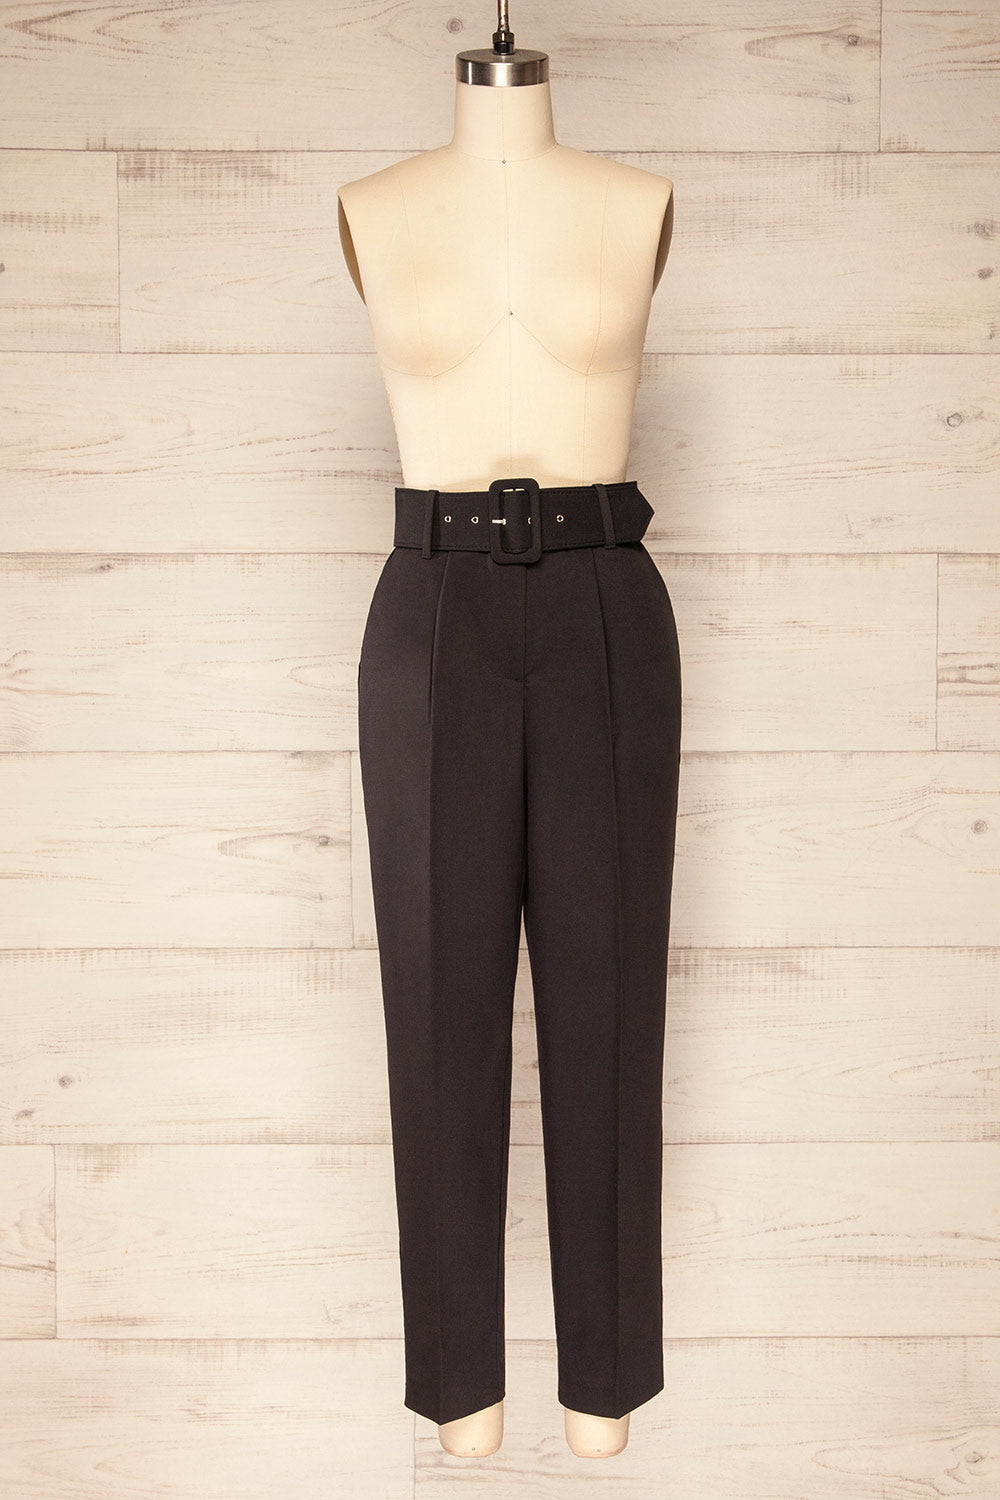 Compostelle Black High-Waisted Pants